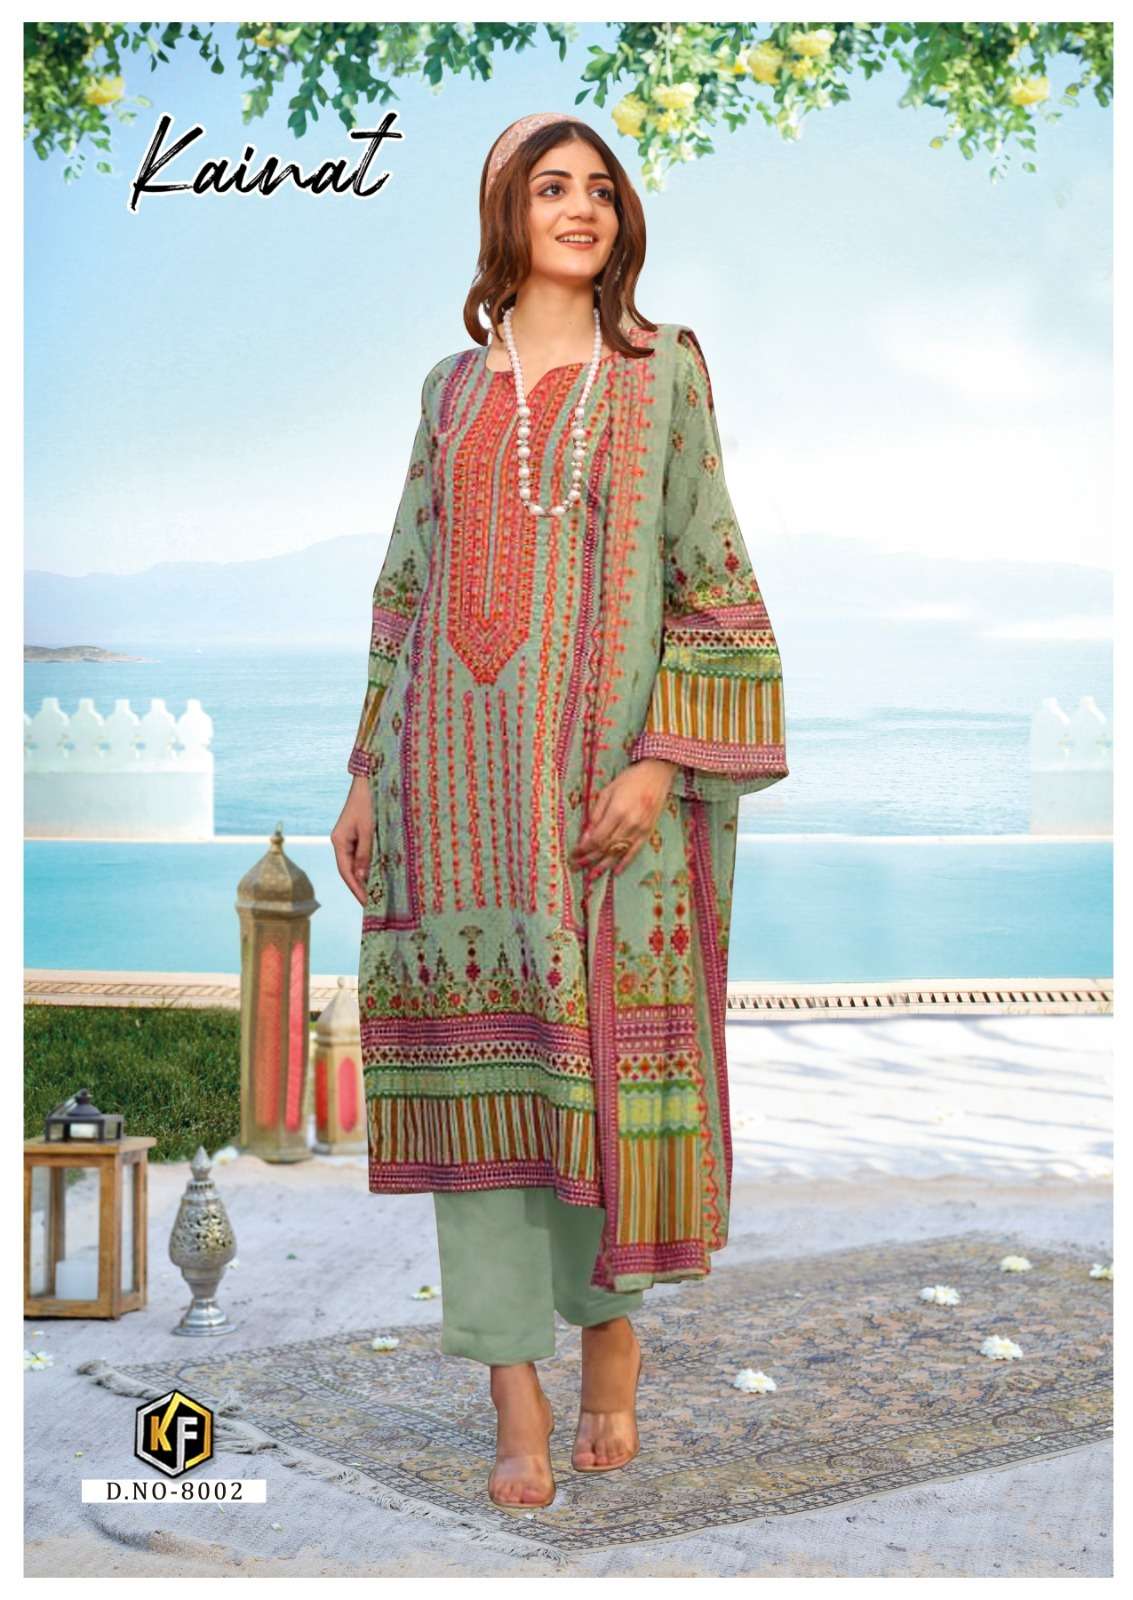 KEVAL FAB KAINAT LUXURY LAWN COLLECTION VOL 8 